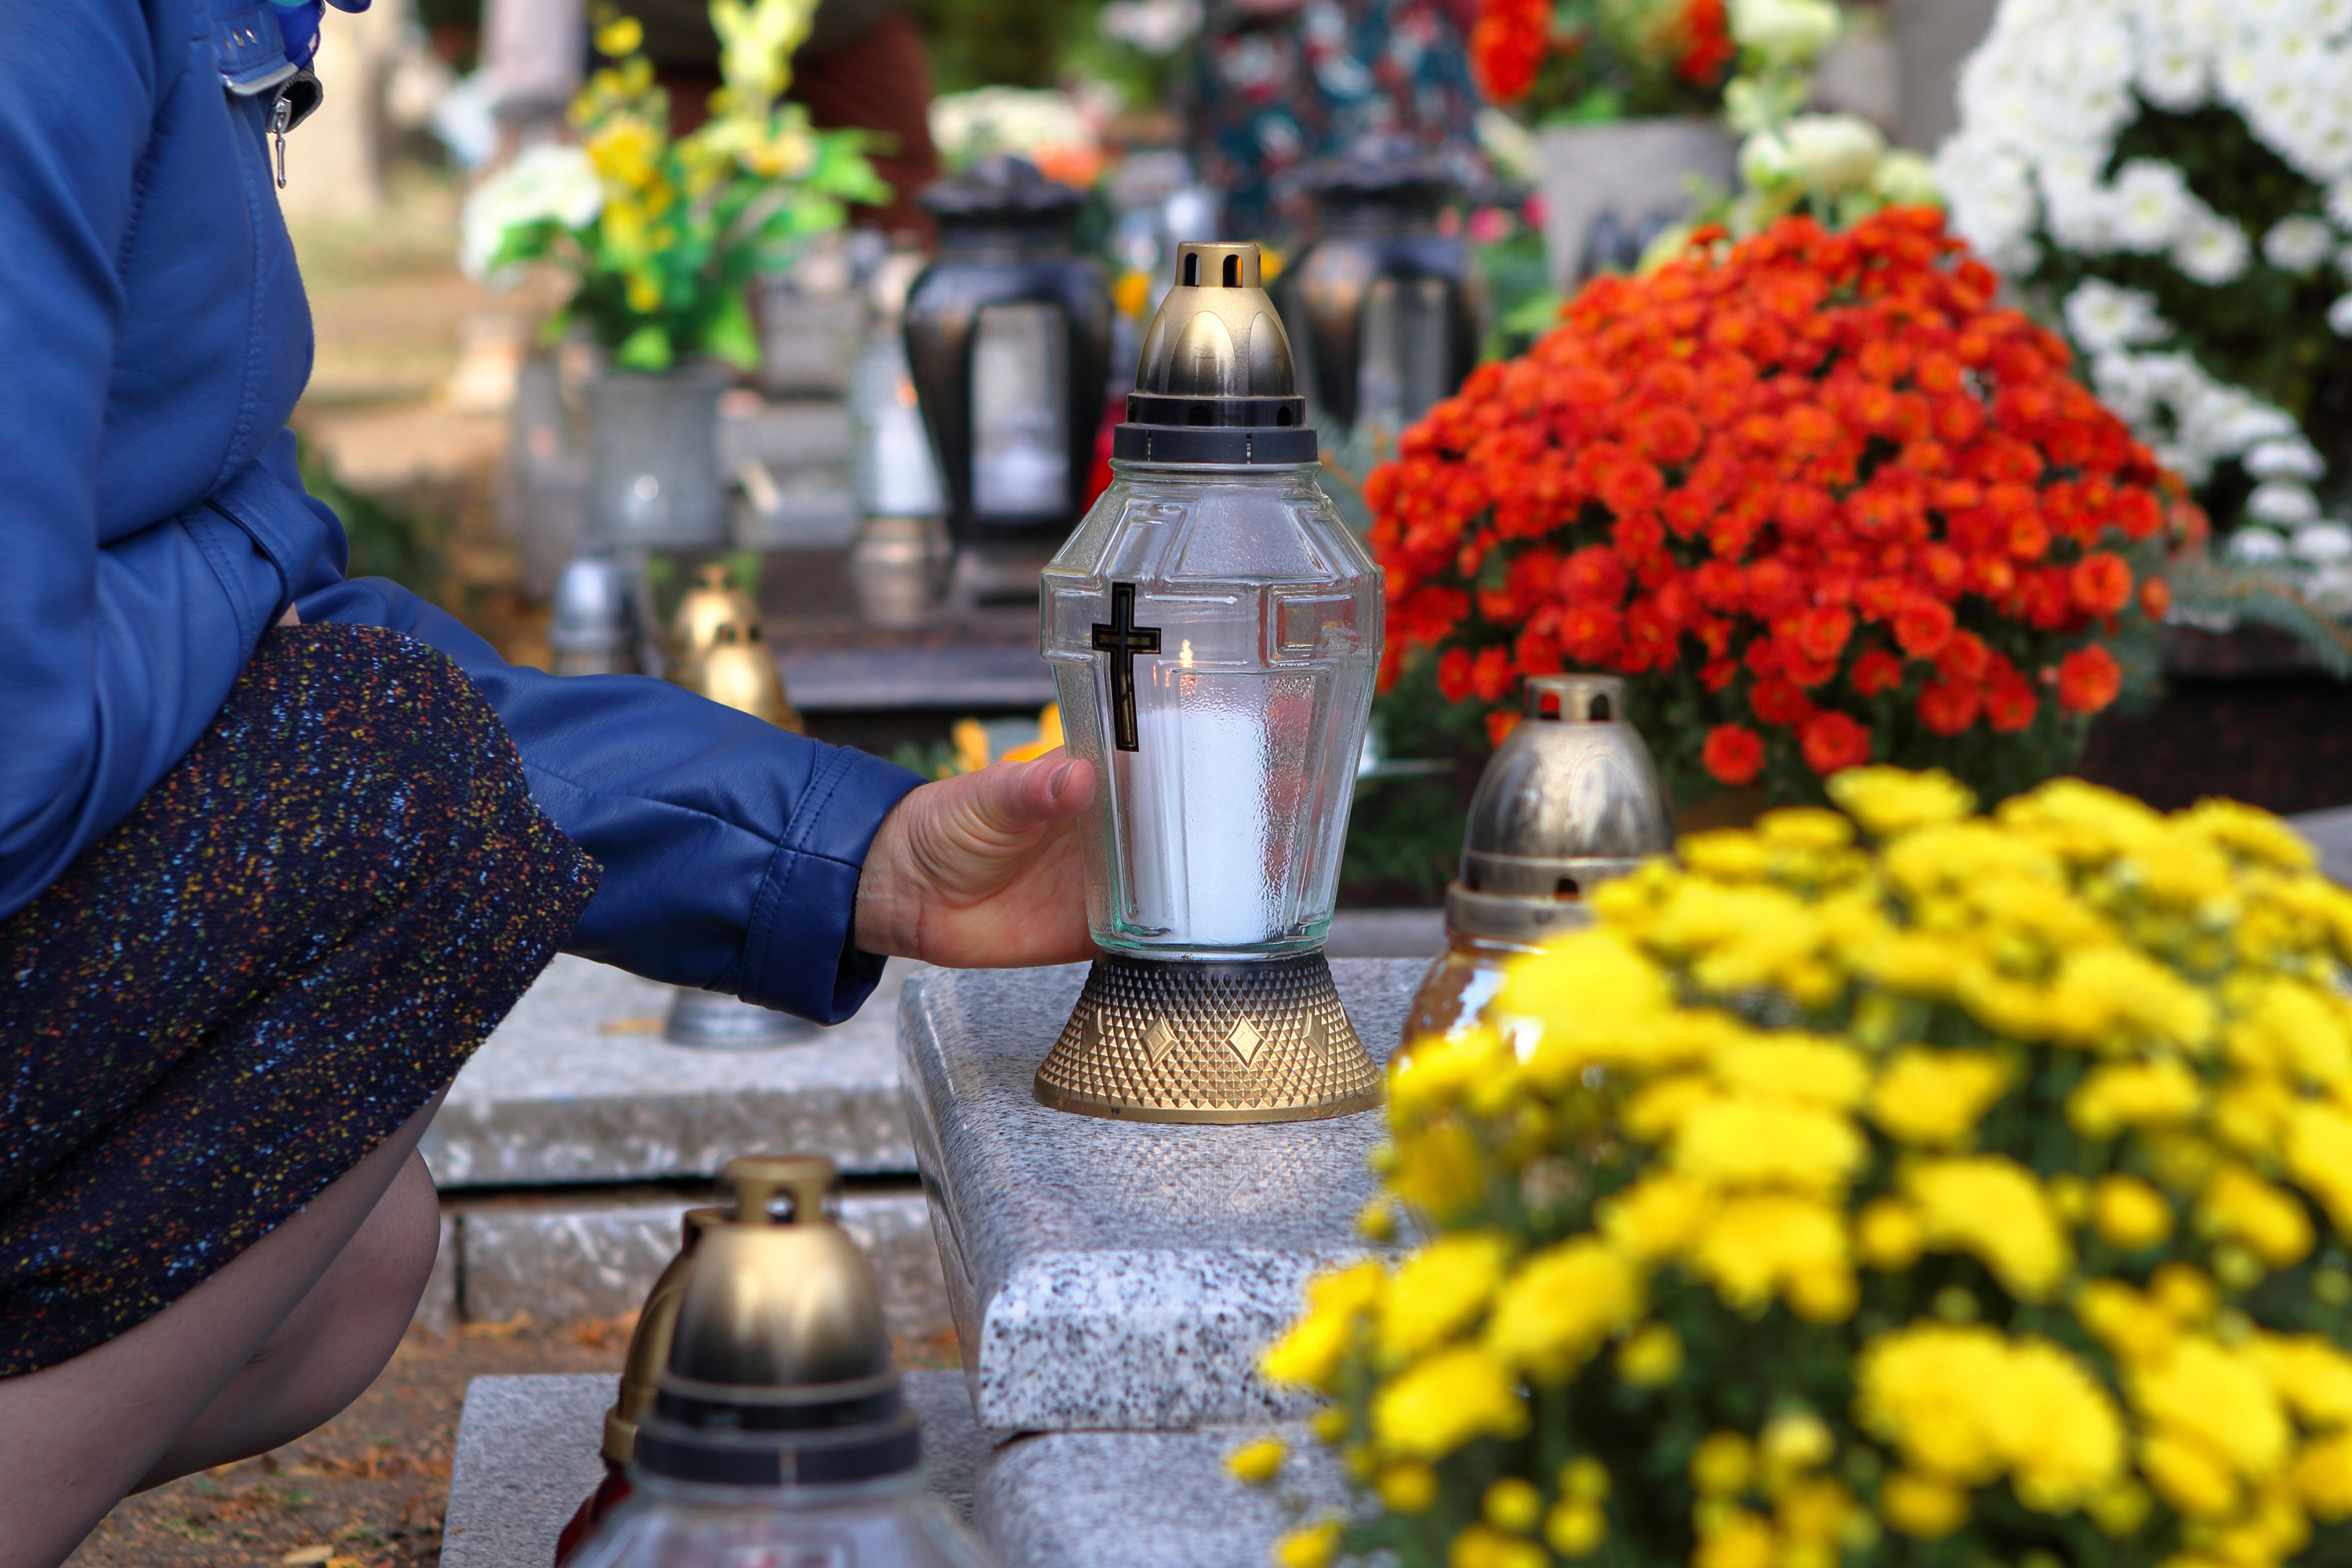 Woman at the cemetery puts a candle on a grave